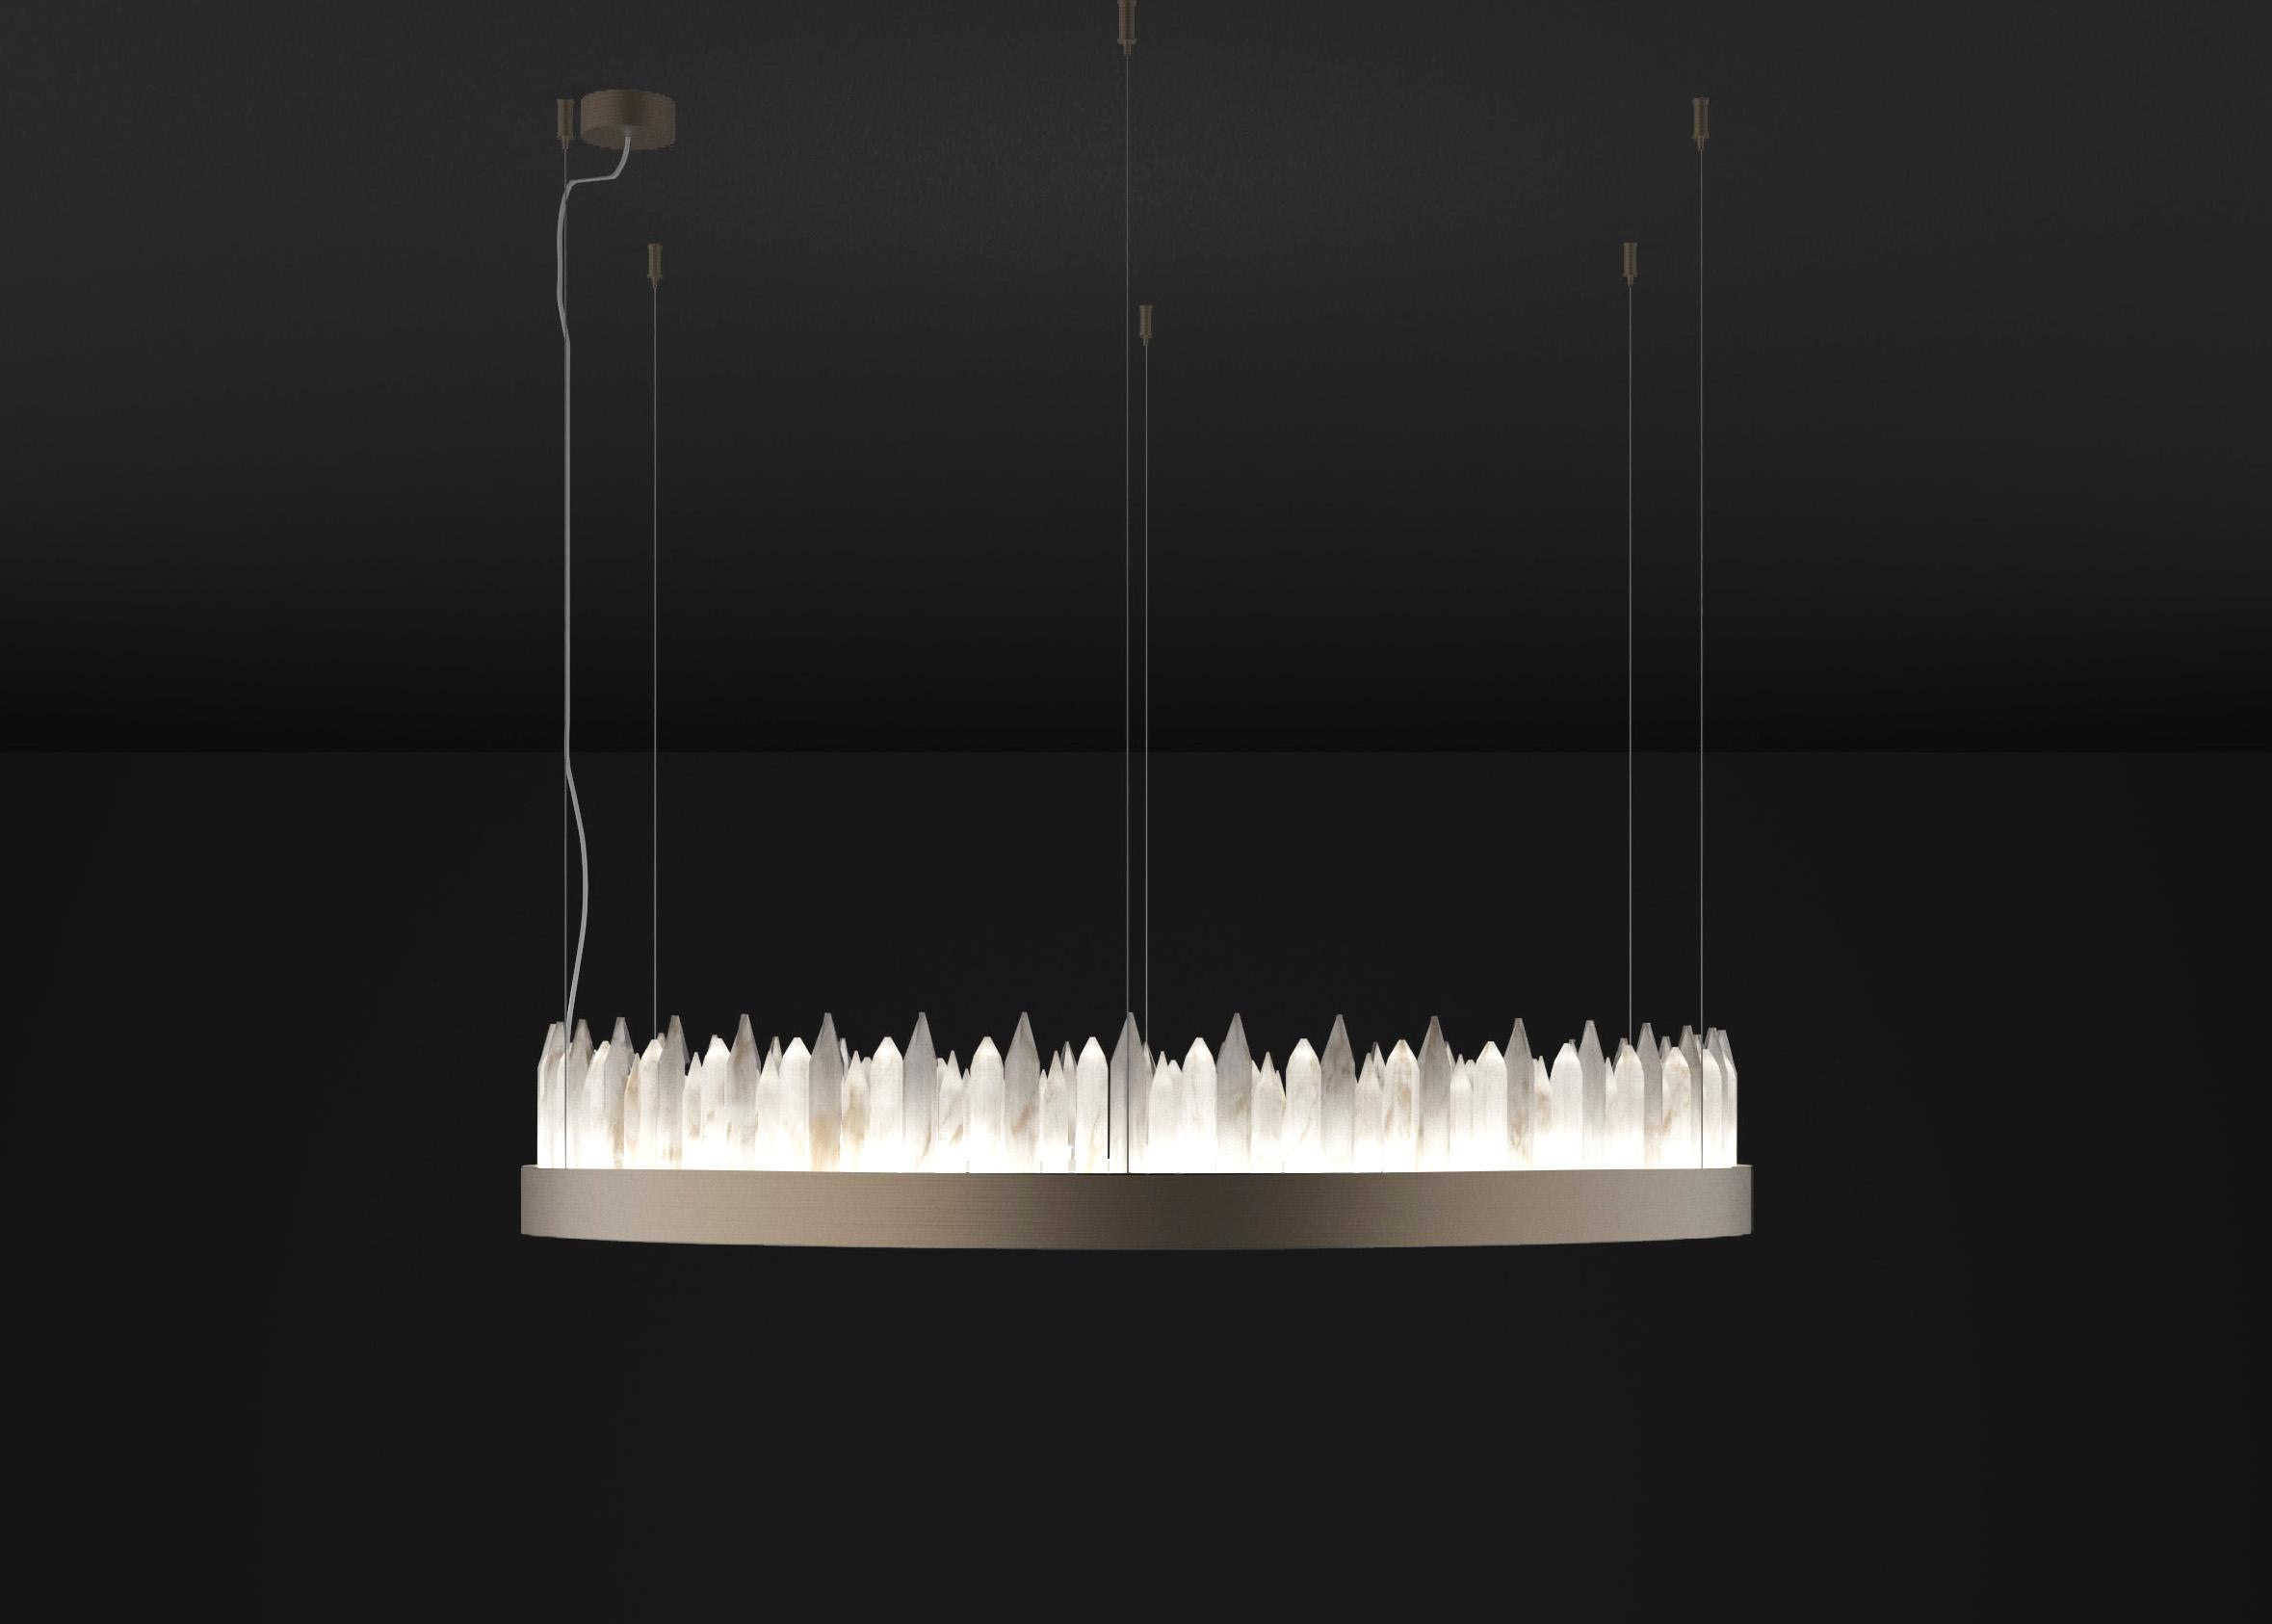 Urano Brushed Brown 80 Pendant Light 3 by Alabastro Italiano
Dimensions: Ø 80 x H 20 cm.
Materials: Glass and brushed brown metal.

2 Strip LED, 108 Watt,  10843 Lumen, 24 V, 3000 K, Wiring CE.

Available in different sizes: Ø 60, Ø 80, Ø 100 and Ø